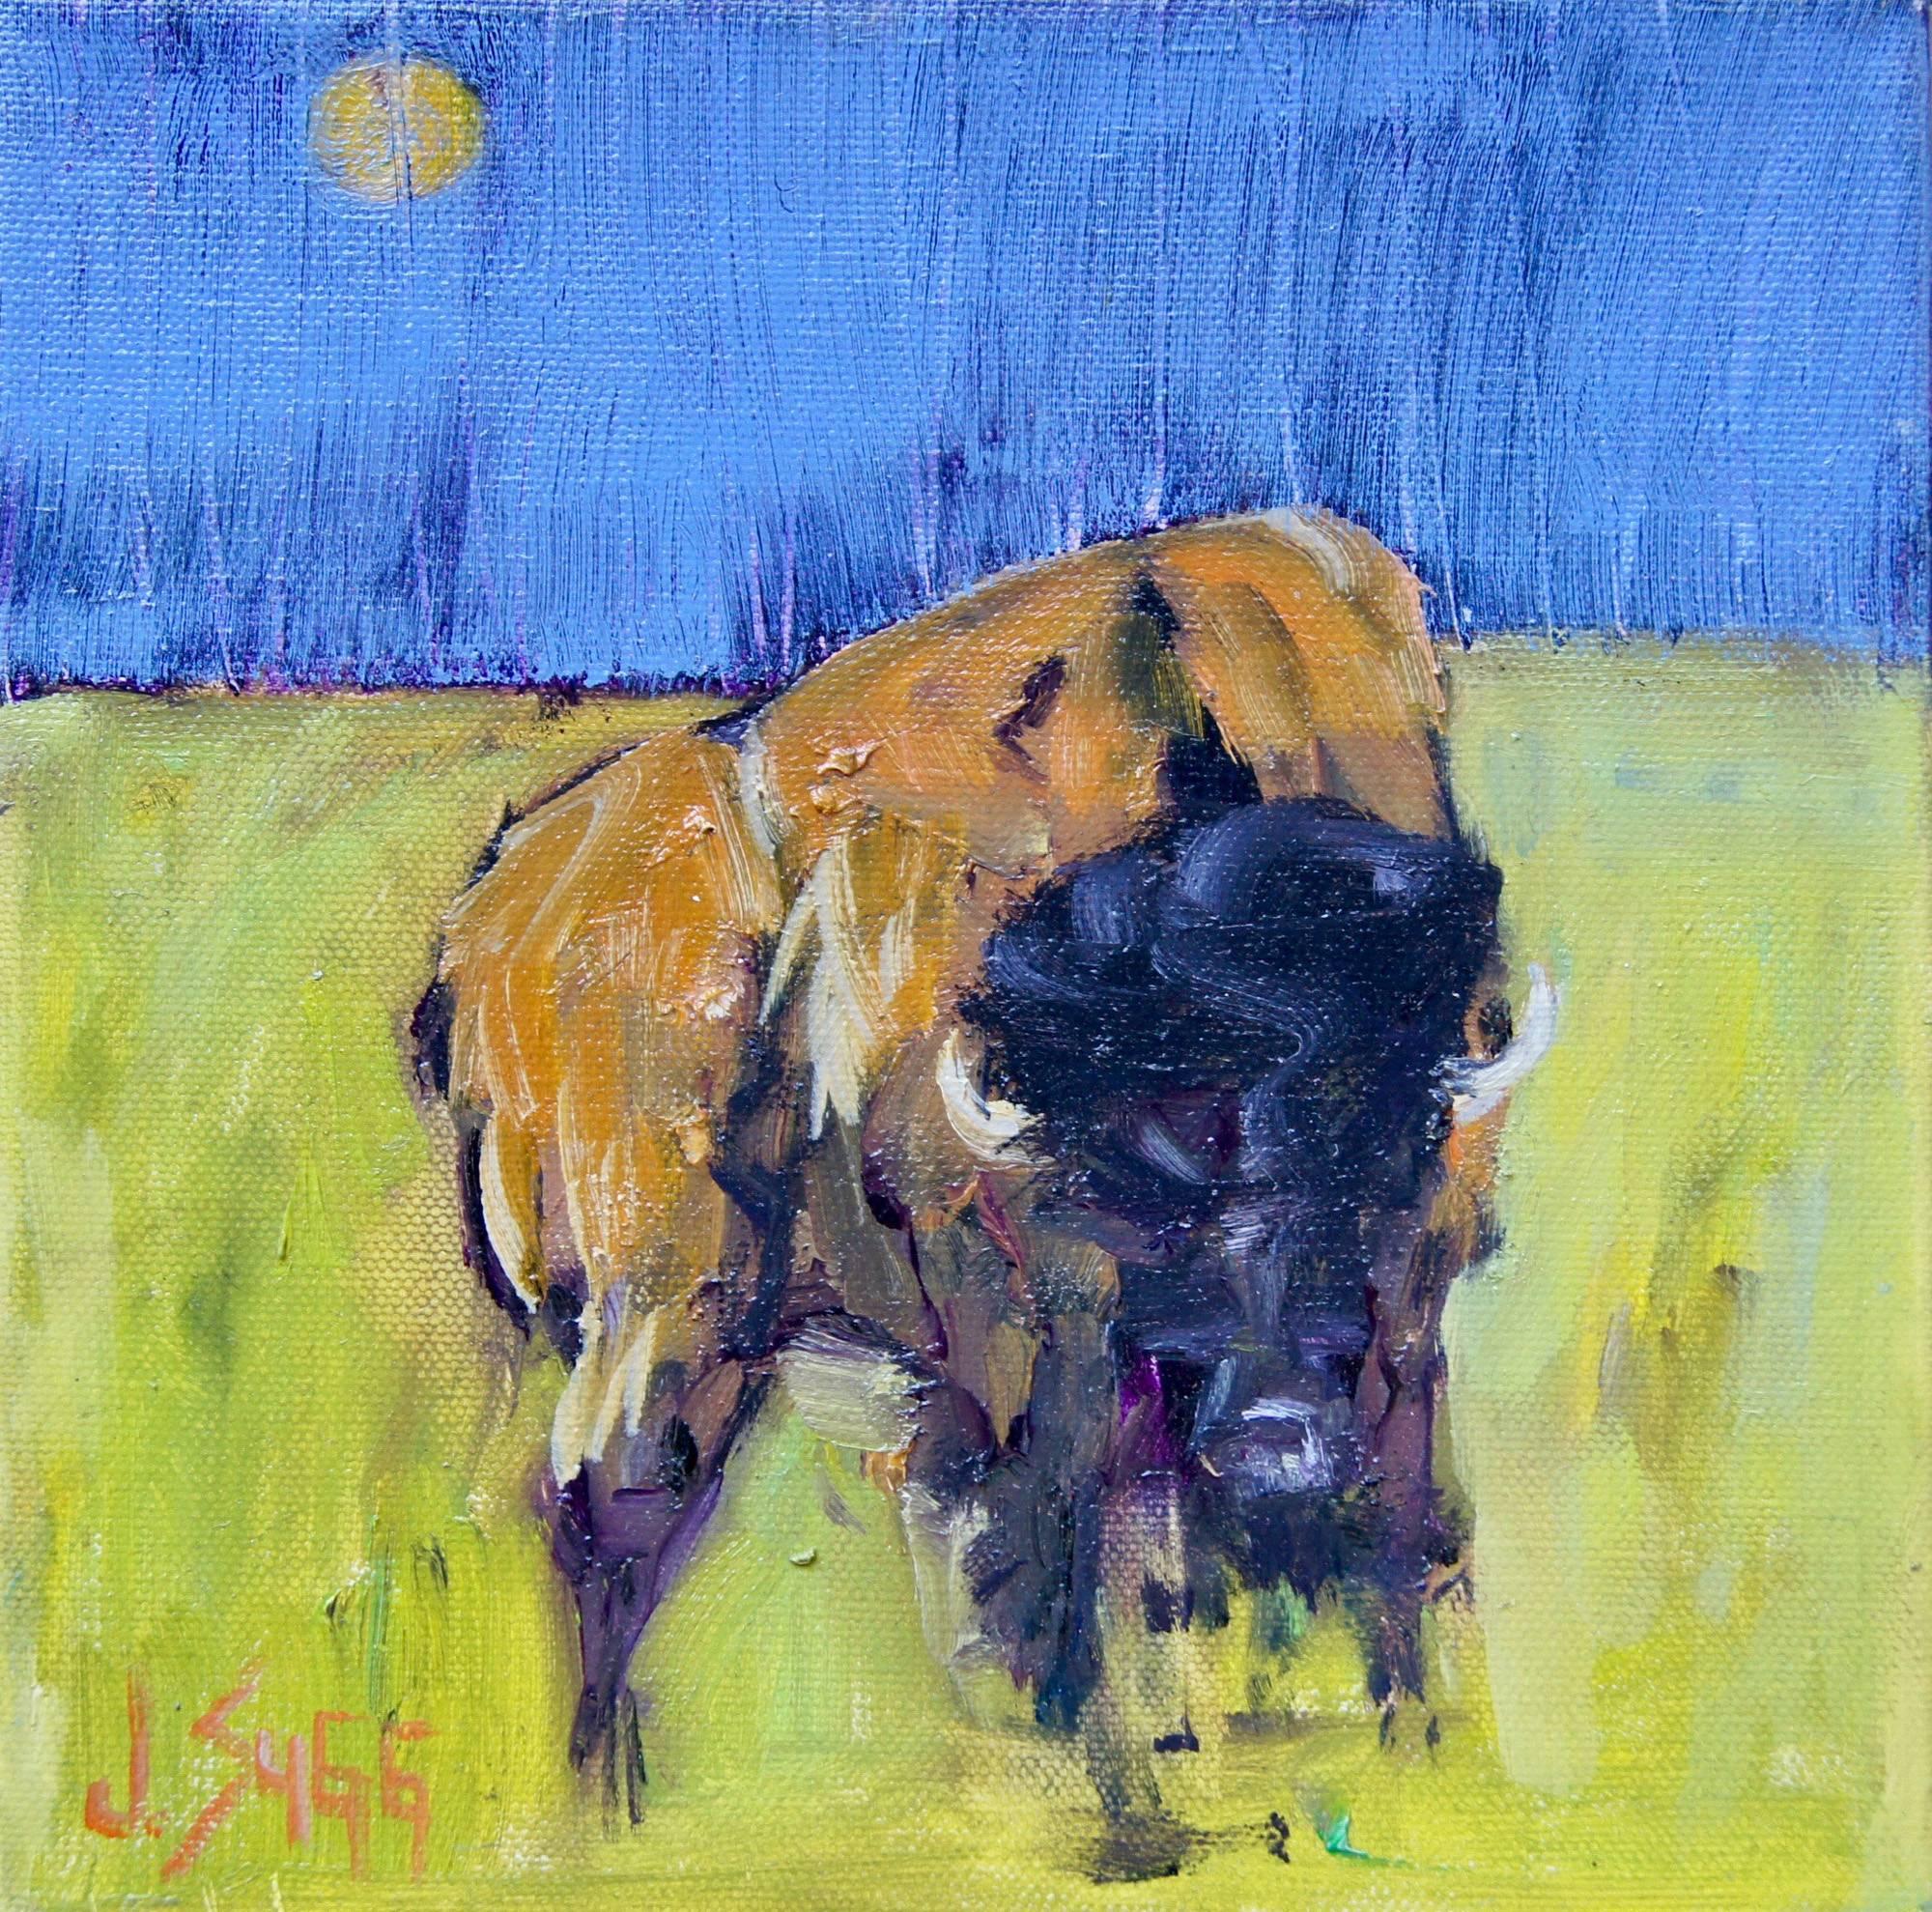 Janice Sugg Abstract Painting - Abstract Bison Painting 'Moonlit Bison I' Urban Wildlife Art, Contemporary Art